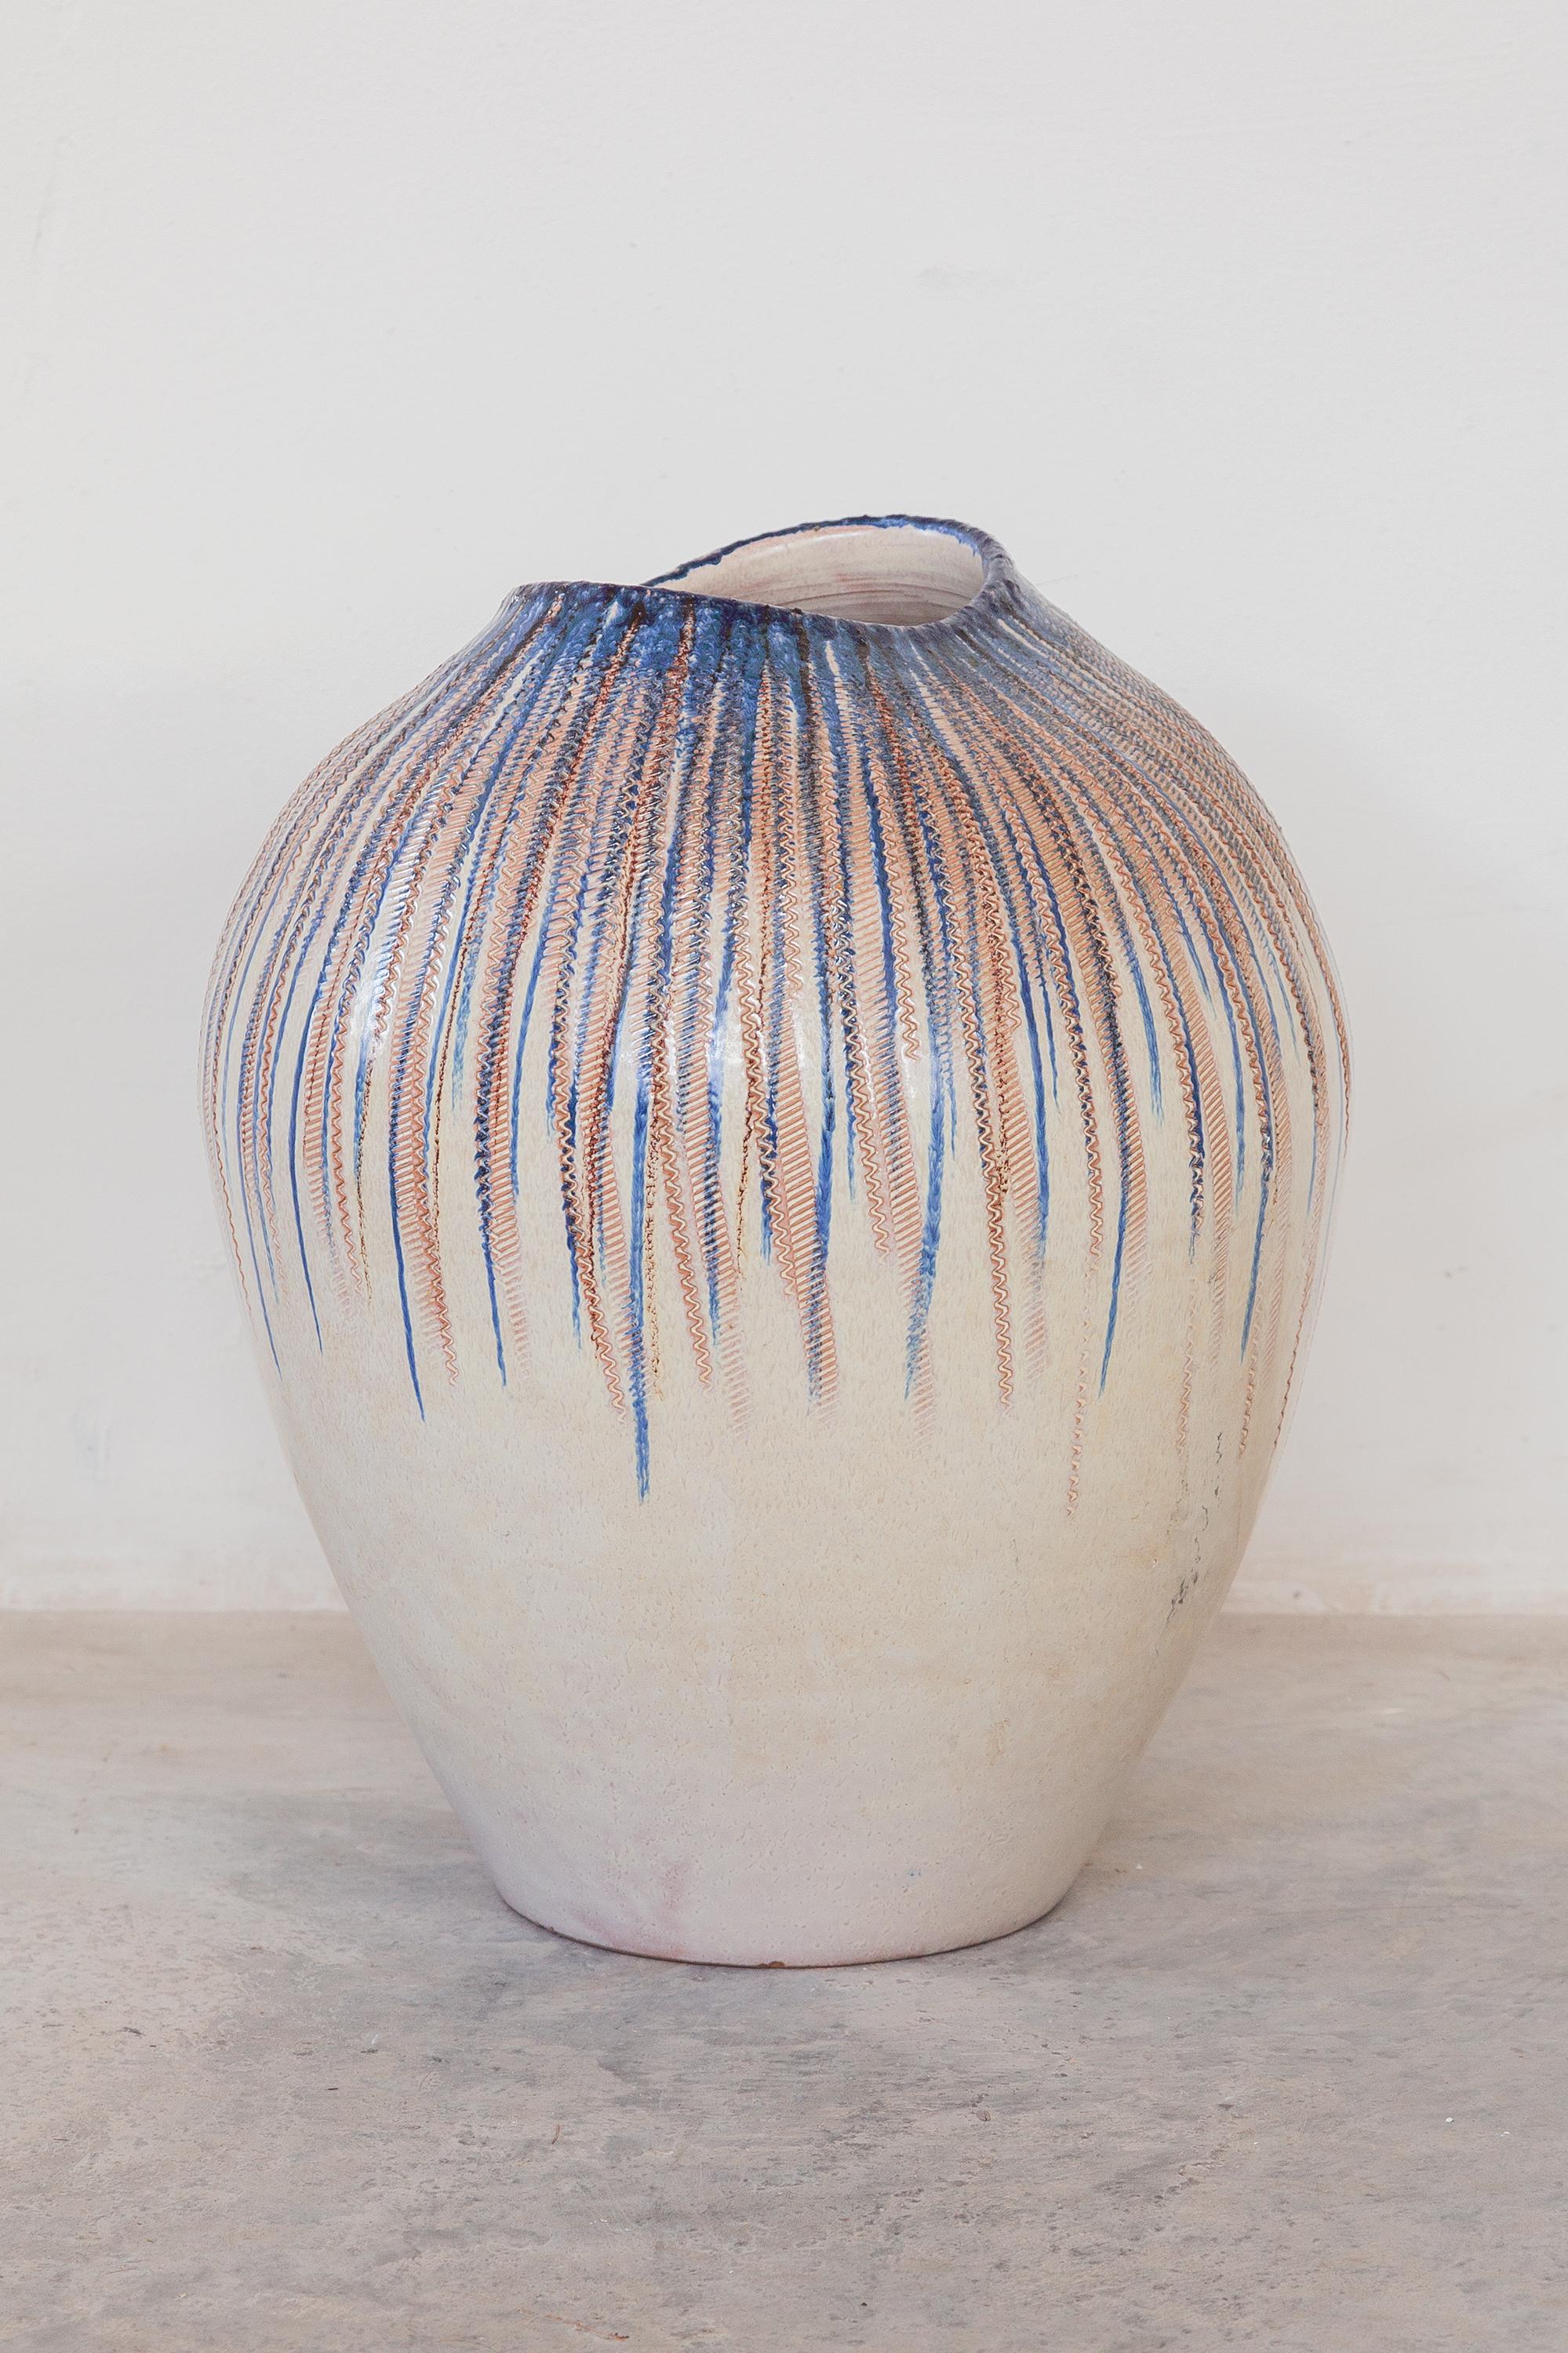 Large stoneware glazed decorative vase. Midcentury era design featuring hand drawn strips of blue colored glaze, Germany, 1960s. Perfect condition. Measures: Height 40 cm.